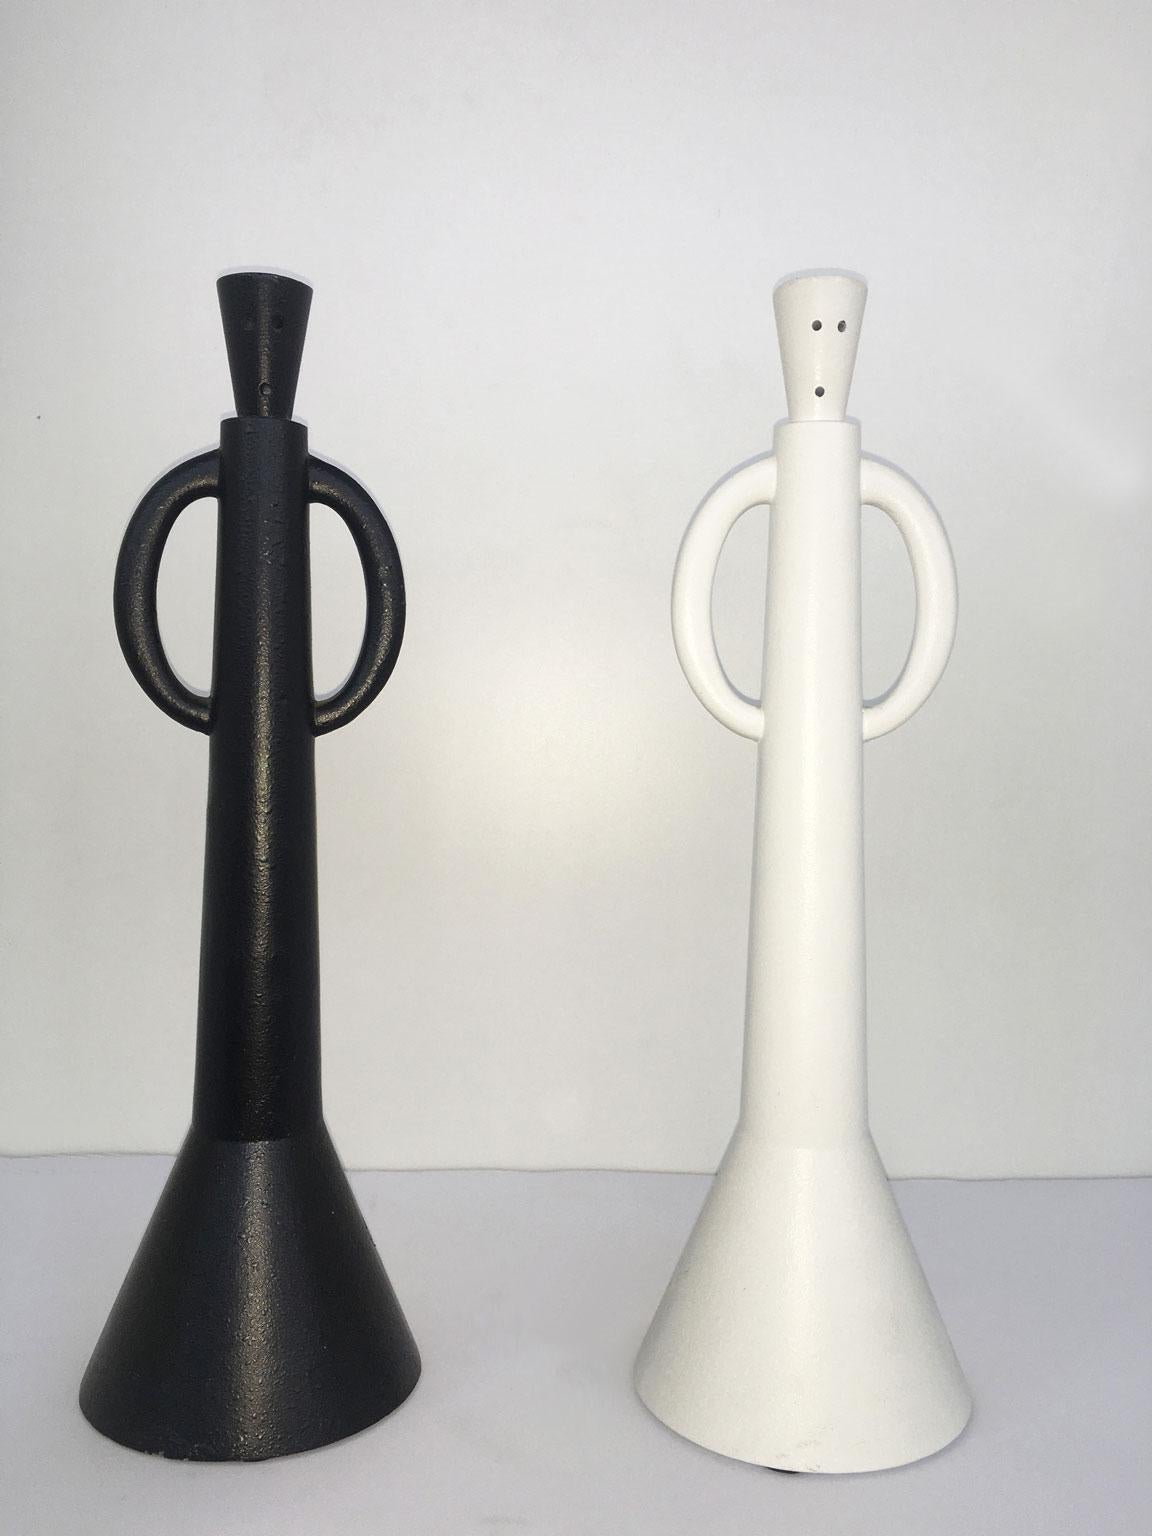 This artwork was  create by the Italian artist Alessandro Guierriero, and it is a multiple of a serie of specimens made in limited edition not numbered.
The set is forged in aluminum and painted in black and white. Their arms are handles to manage